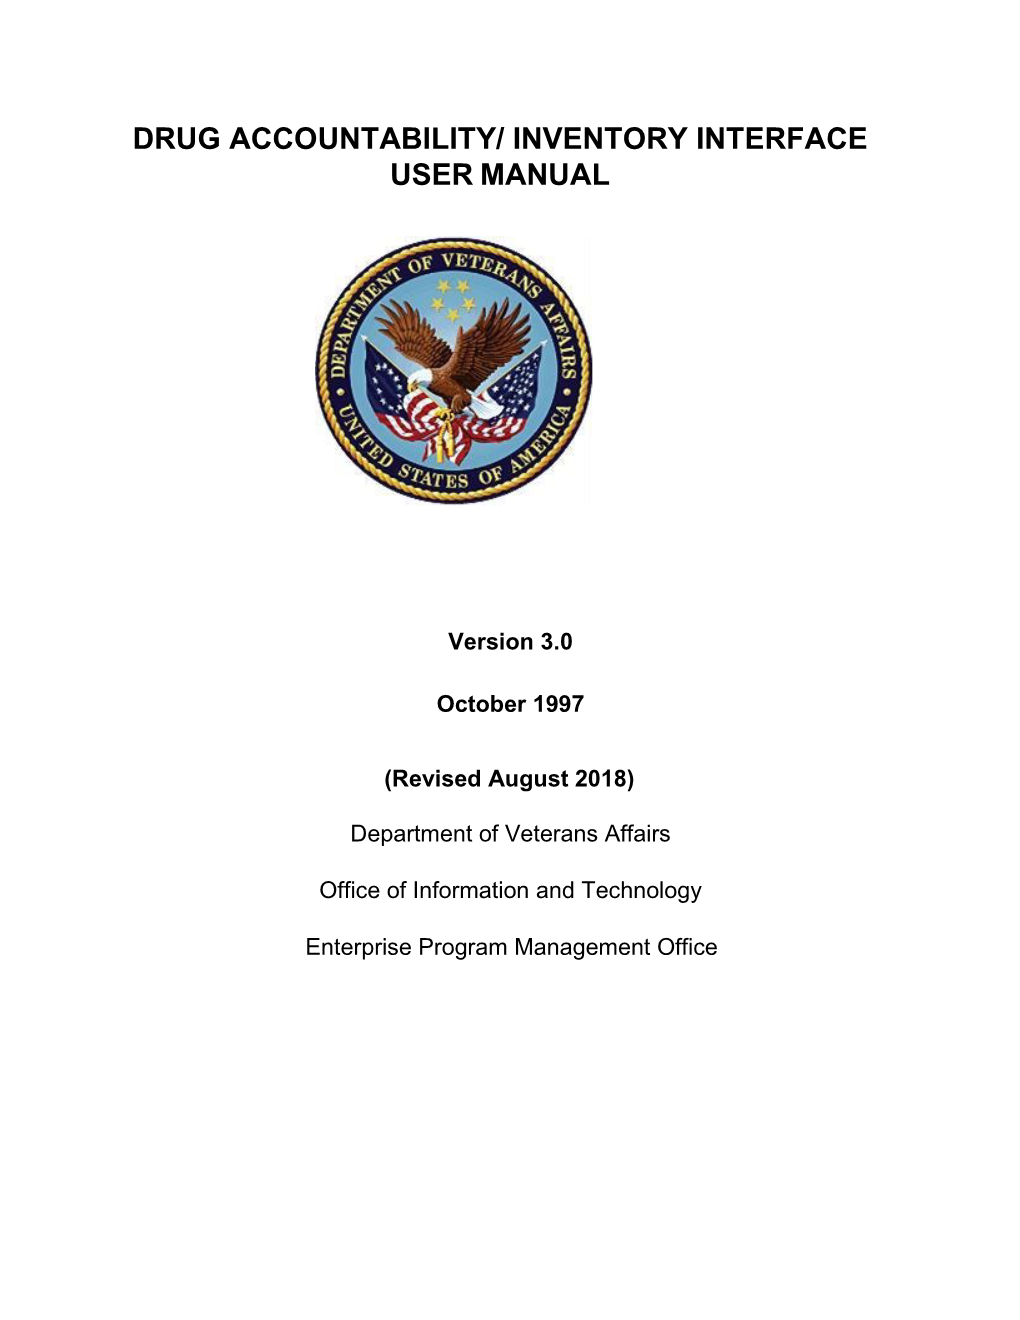 Drug Accountability/ Inventory Interface User Manual